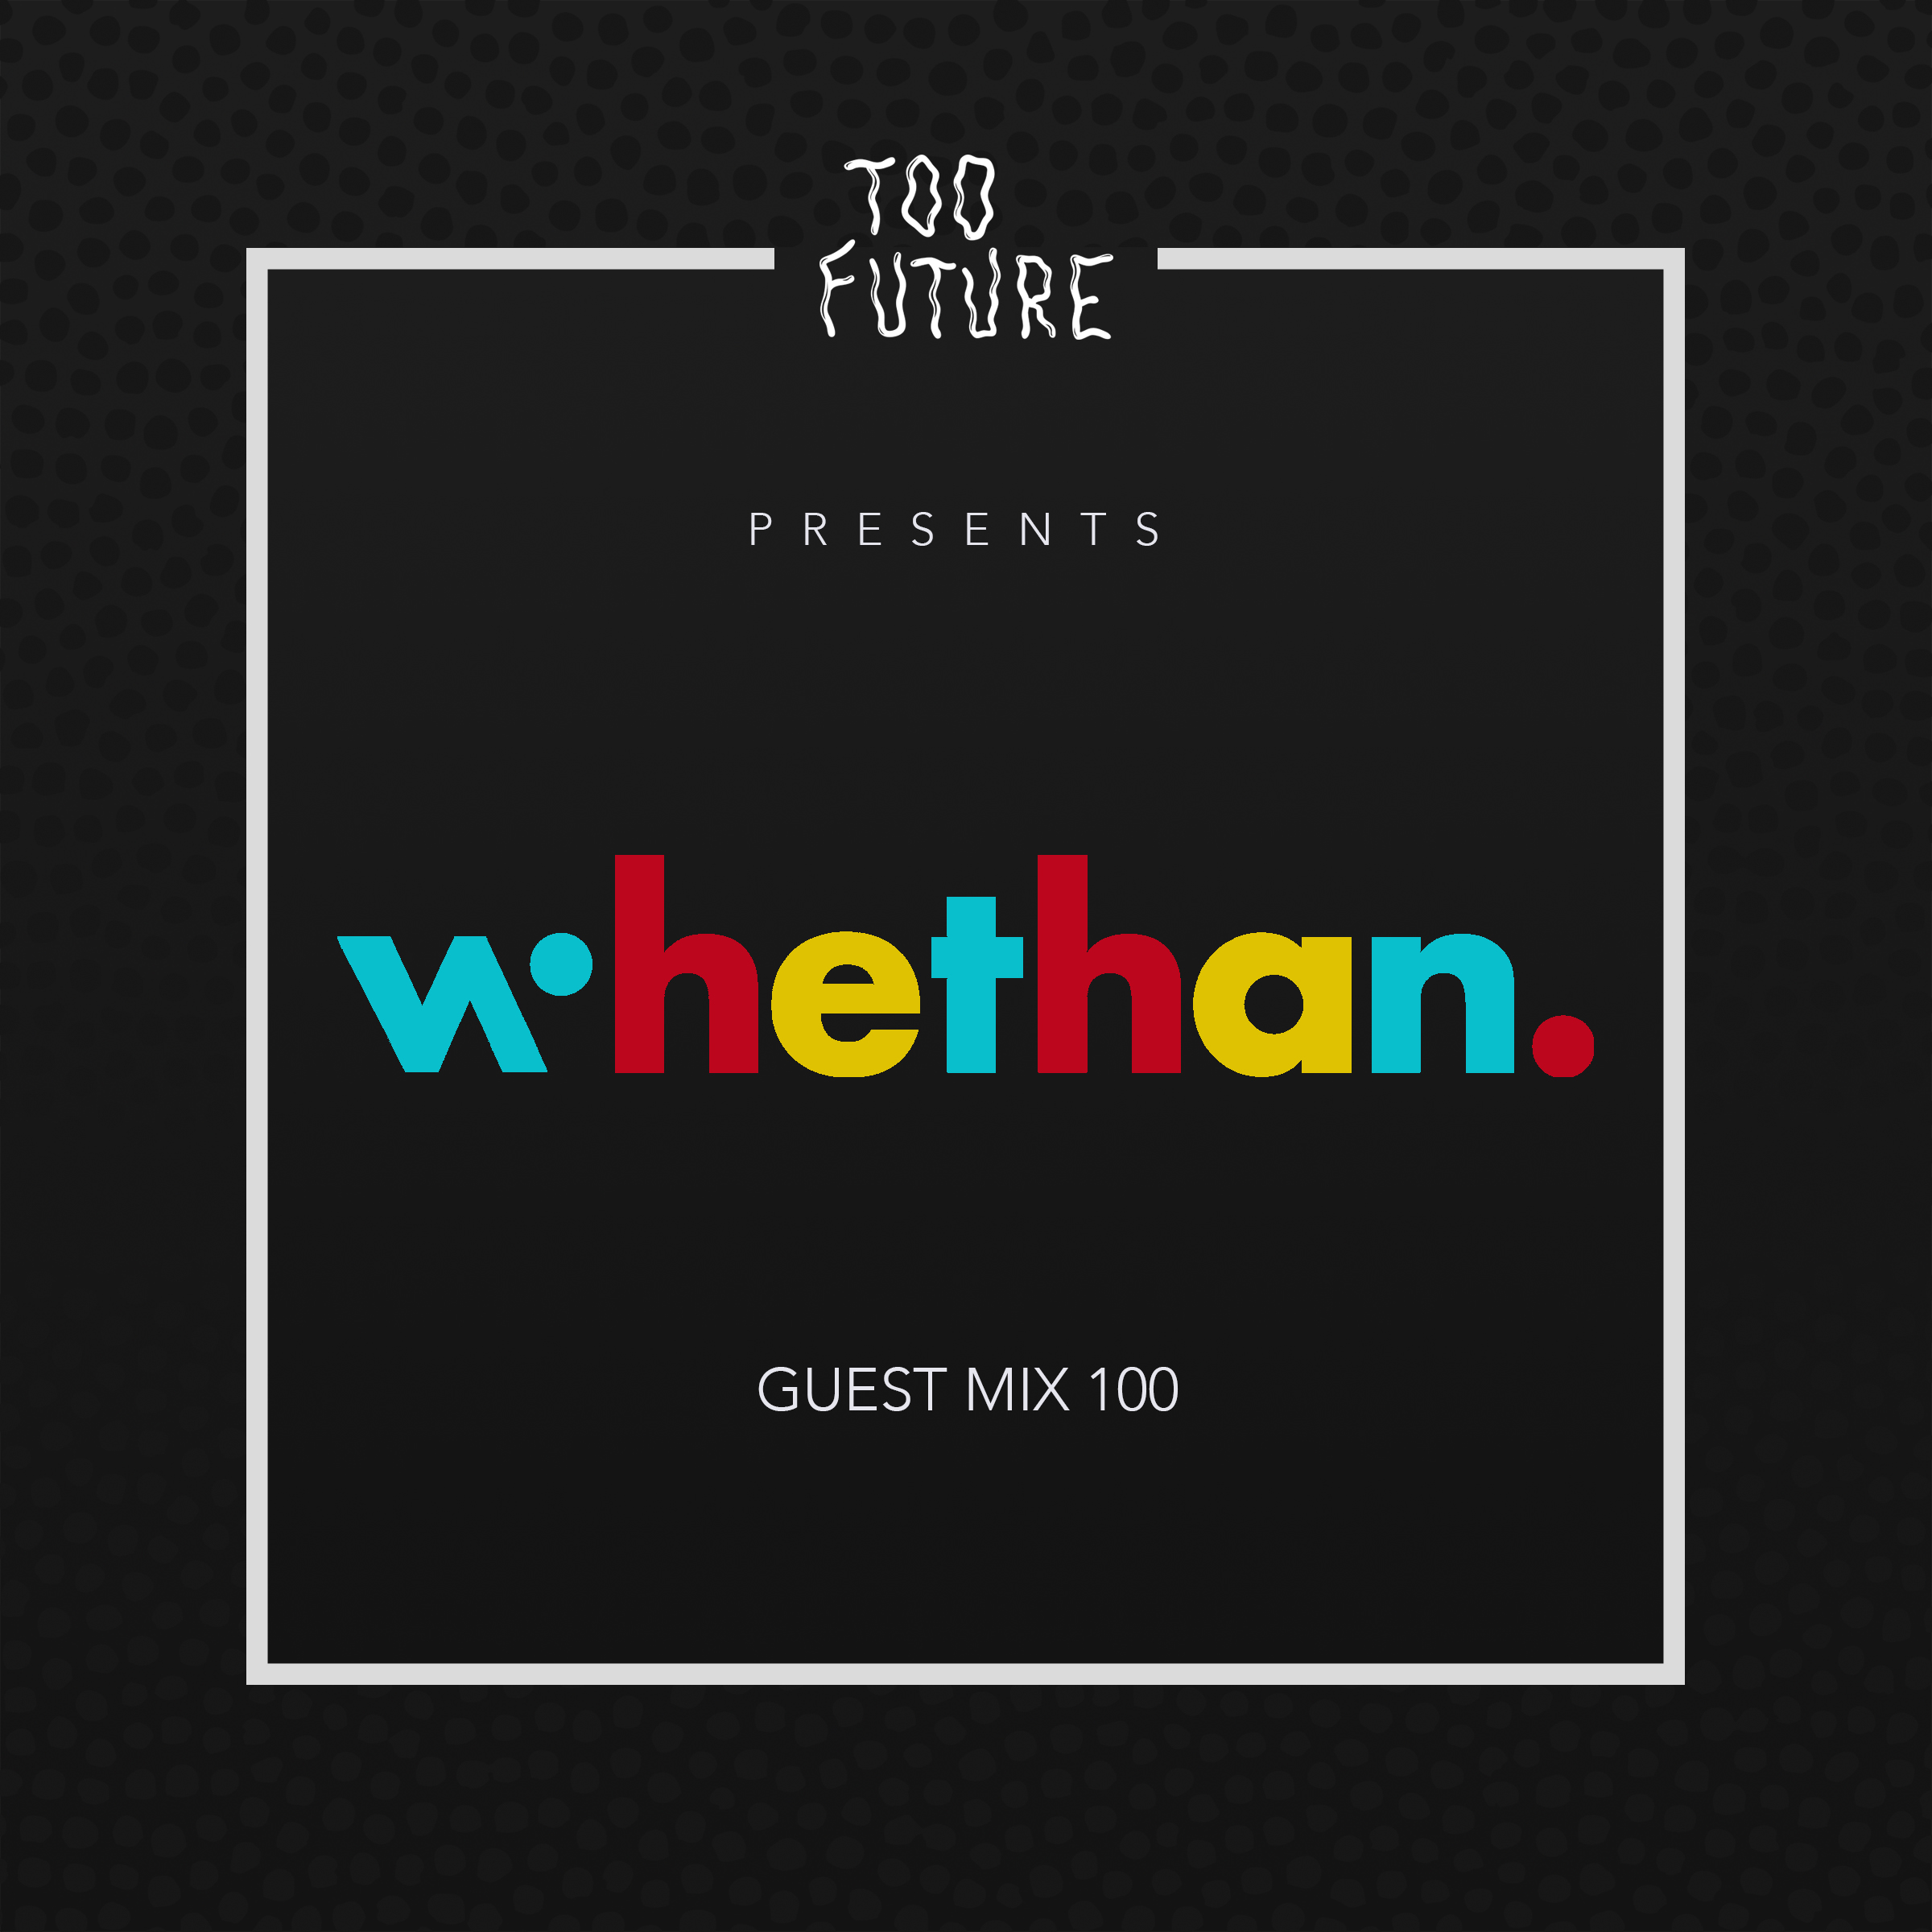 TOO-FUTURE-GUEST-MIX-ART-WHETHAN-100 (1)